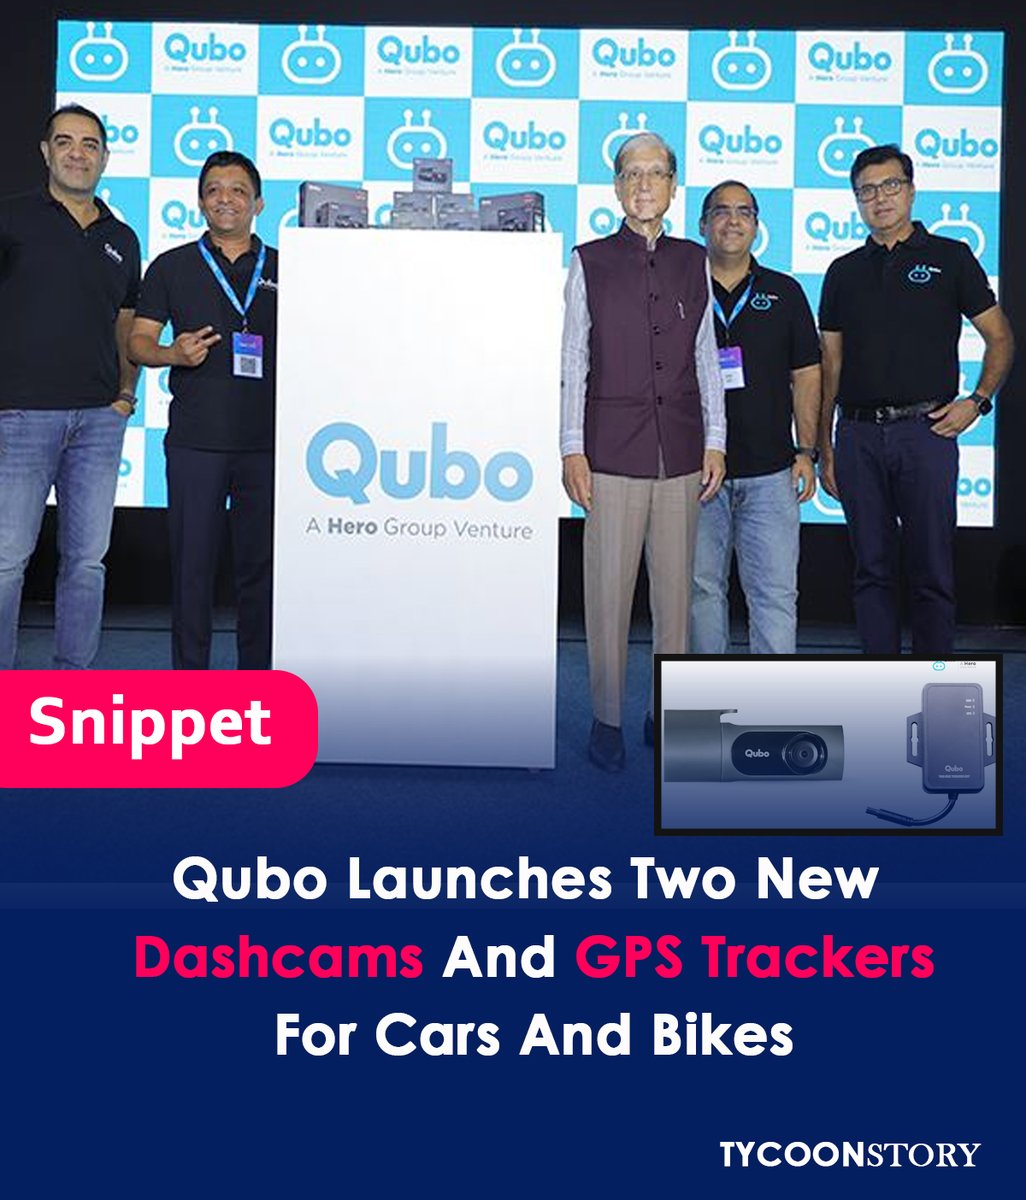 Qubo Launches New Gps Trackers For Cars And Bikes, With Real-time Tracking And Safety Features.
#QuboGPSTracker #QuboConnectedWorld #GPSTracker #BikeGPSTracker #VehicleGPSTracker #GPSTracking #VehicleTracking #CarTracking #BikeTracking #SafetyFirst  #SmartDevices @QuboWorld